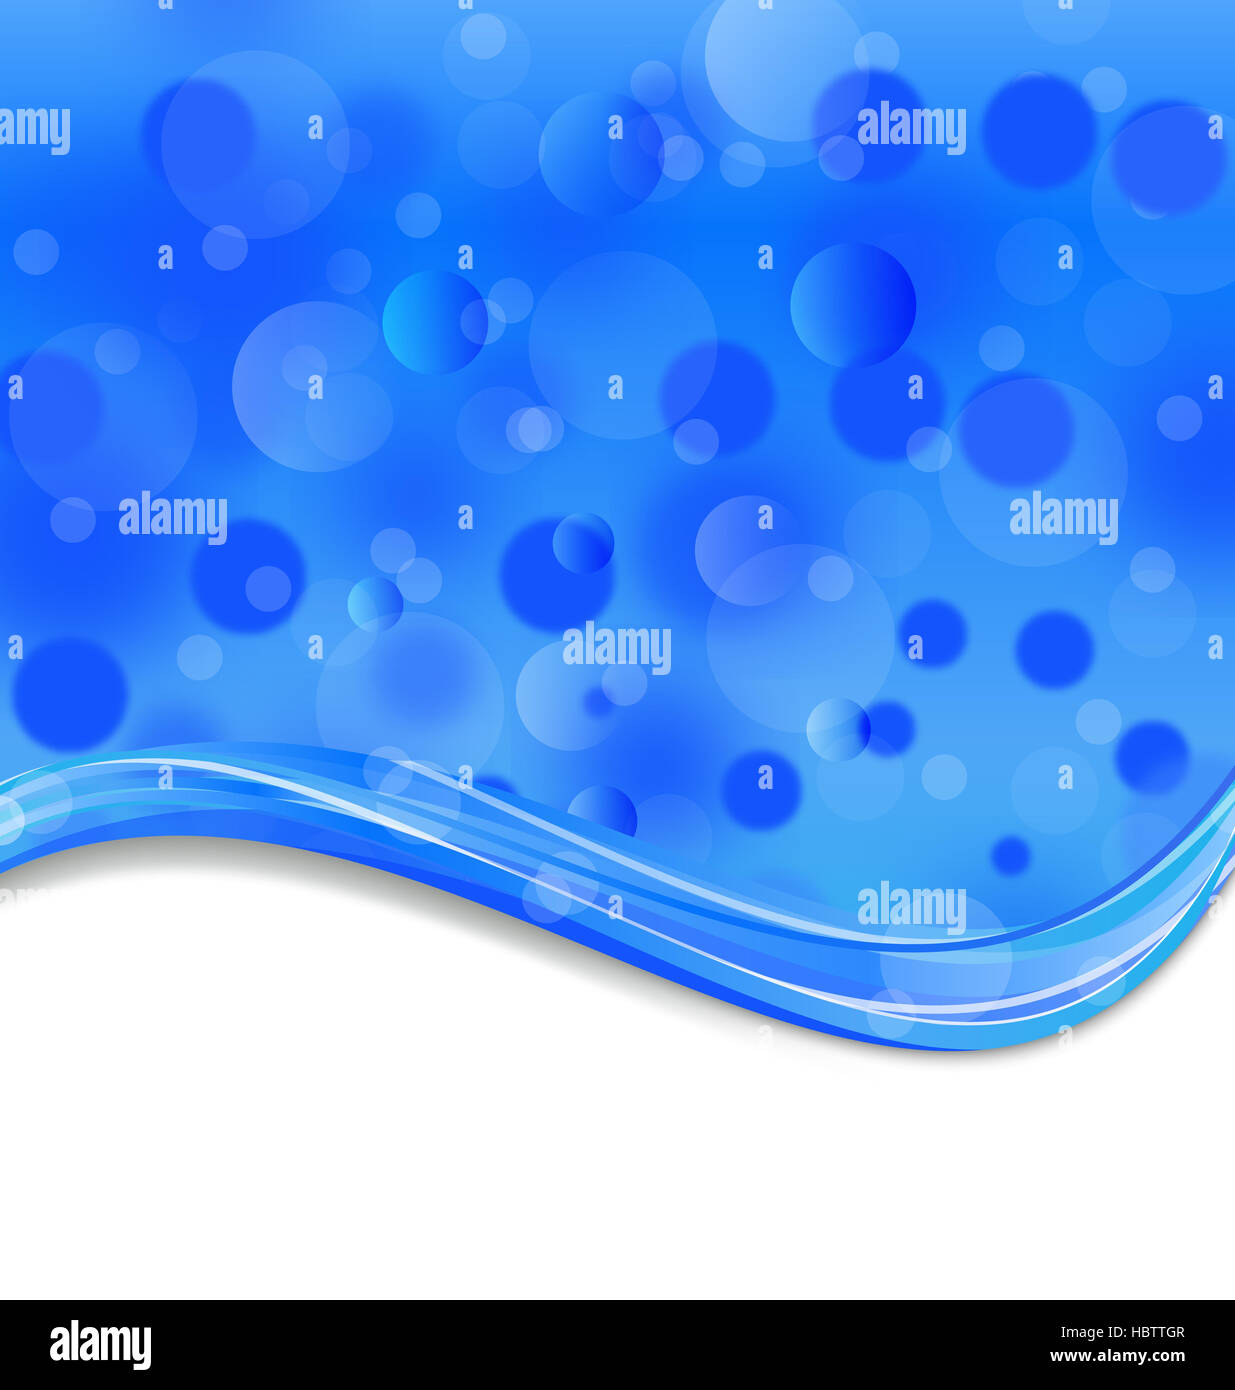 Abstract blue background with light effect Stock Photo